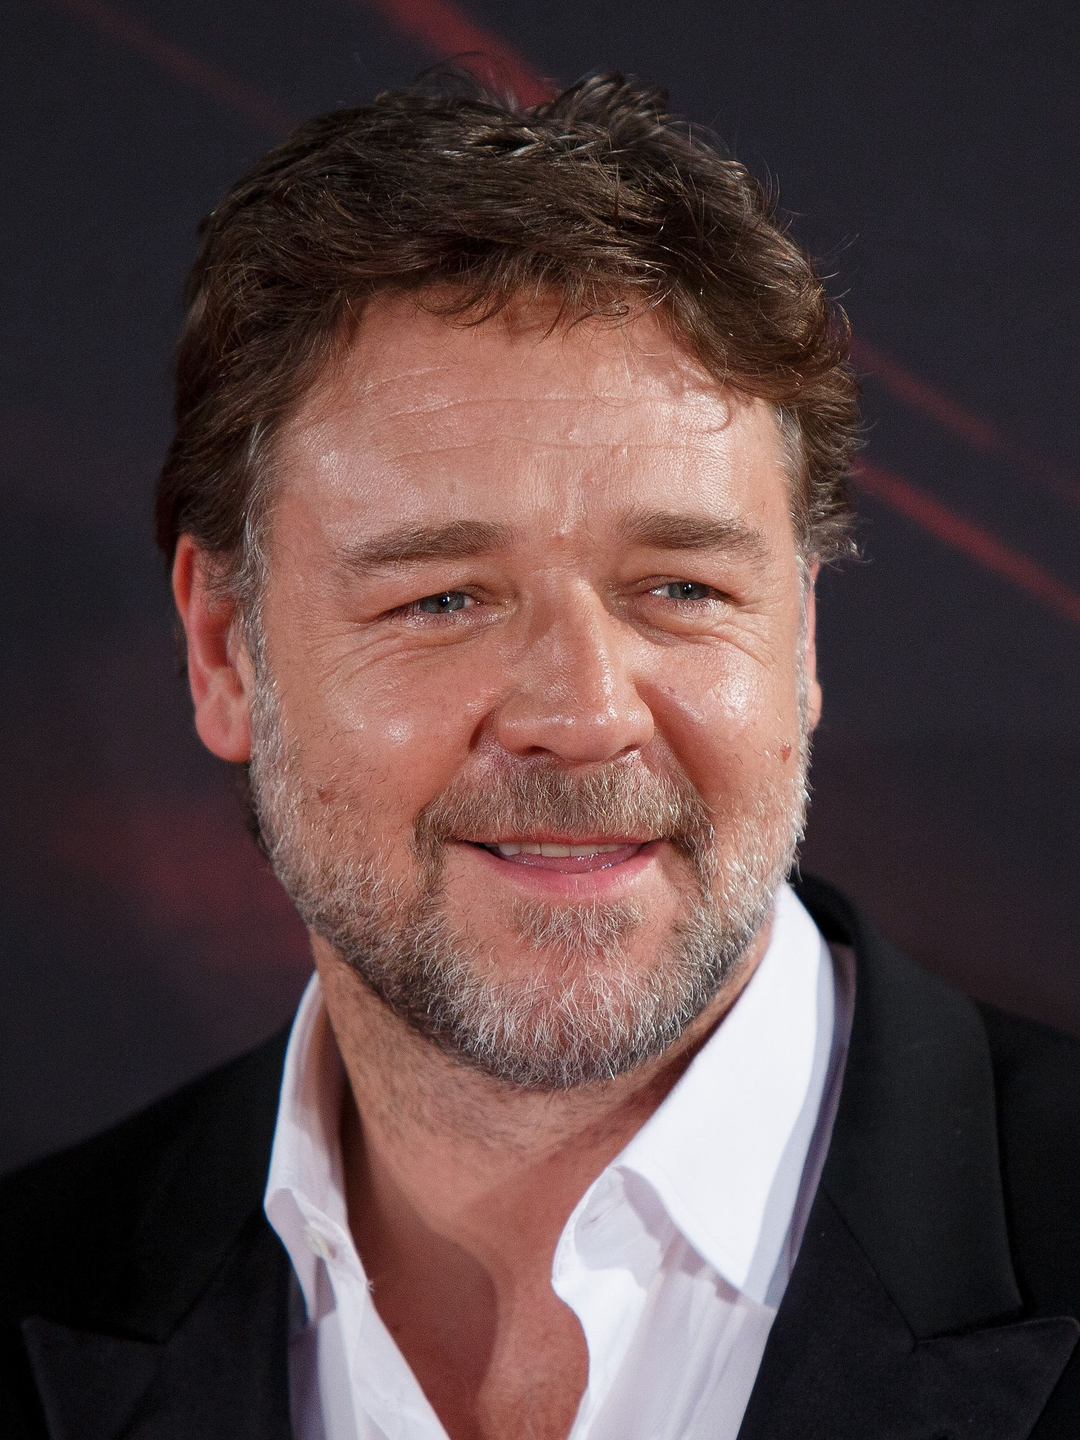 Russell Crowe who is his father